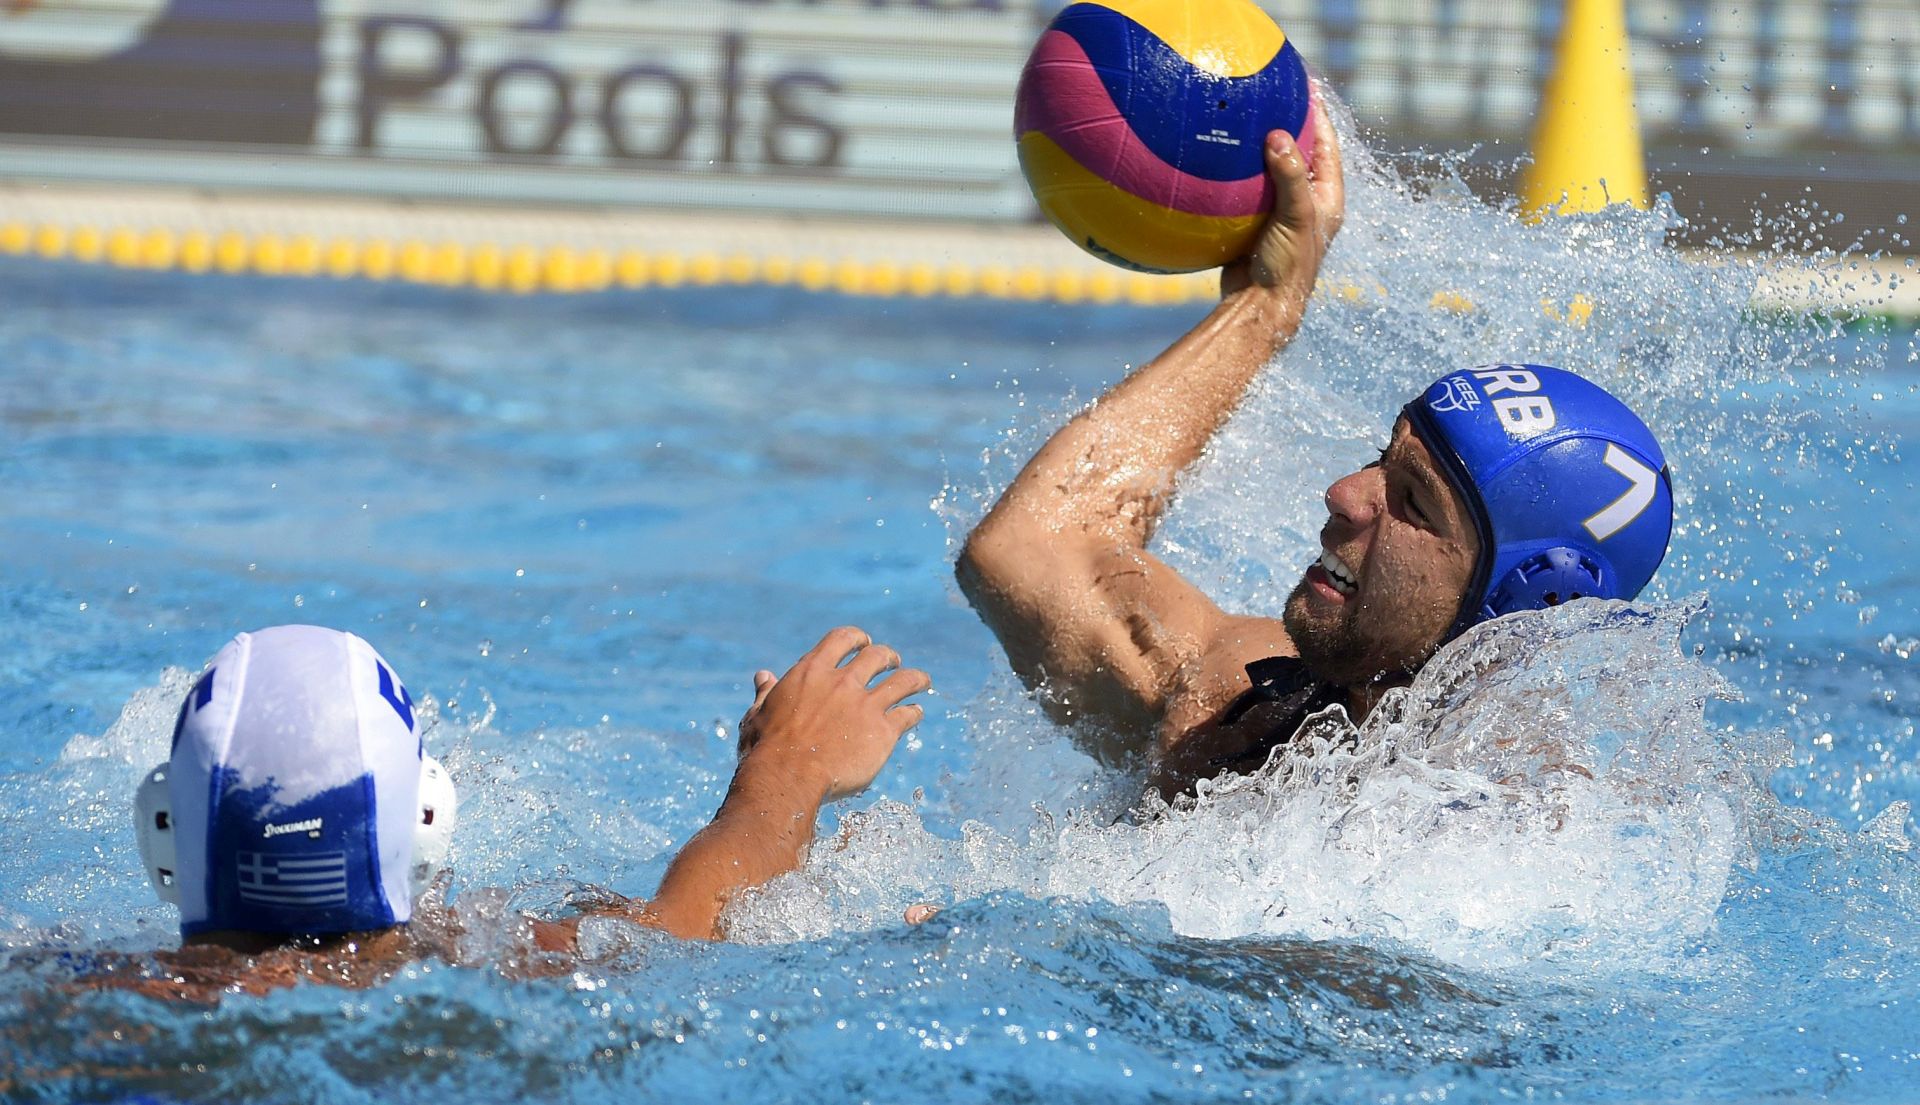 epa06116202 Ioannis Fountoulis (L) of Greece in action against Nemanja Ubovic (R) of Serbia during the men's Water Polo bronze medal match between Greece and Serbia at the 17th FINA Swimming World Championships in the Hajos Alfred National Swimming Pool in Budapest, Hungary, 29 July 2017.  EPA/BALAZS CZAGANY HUNGARY OUT